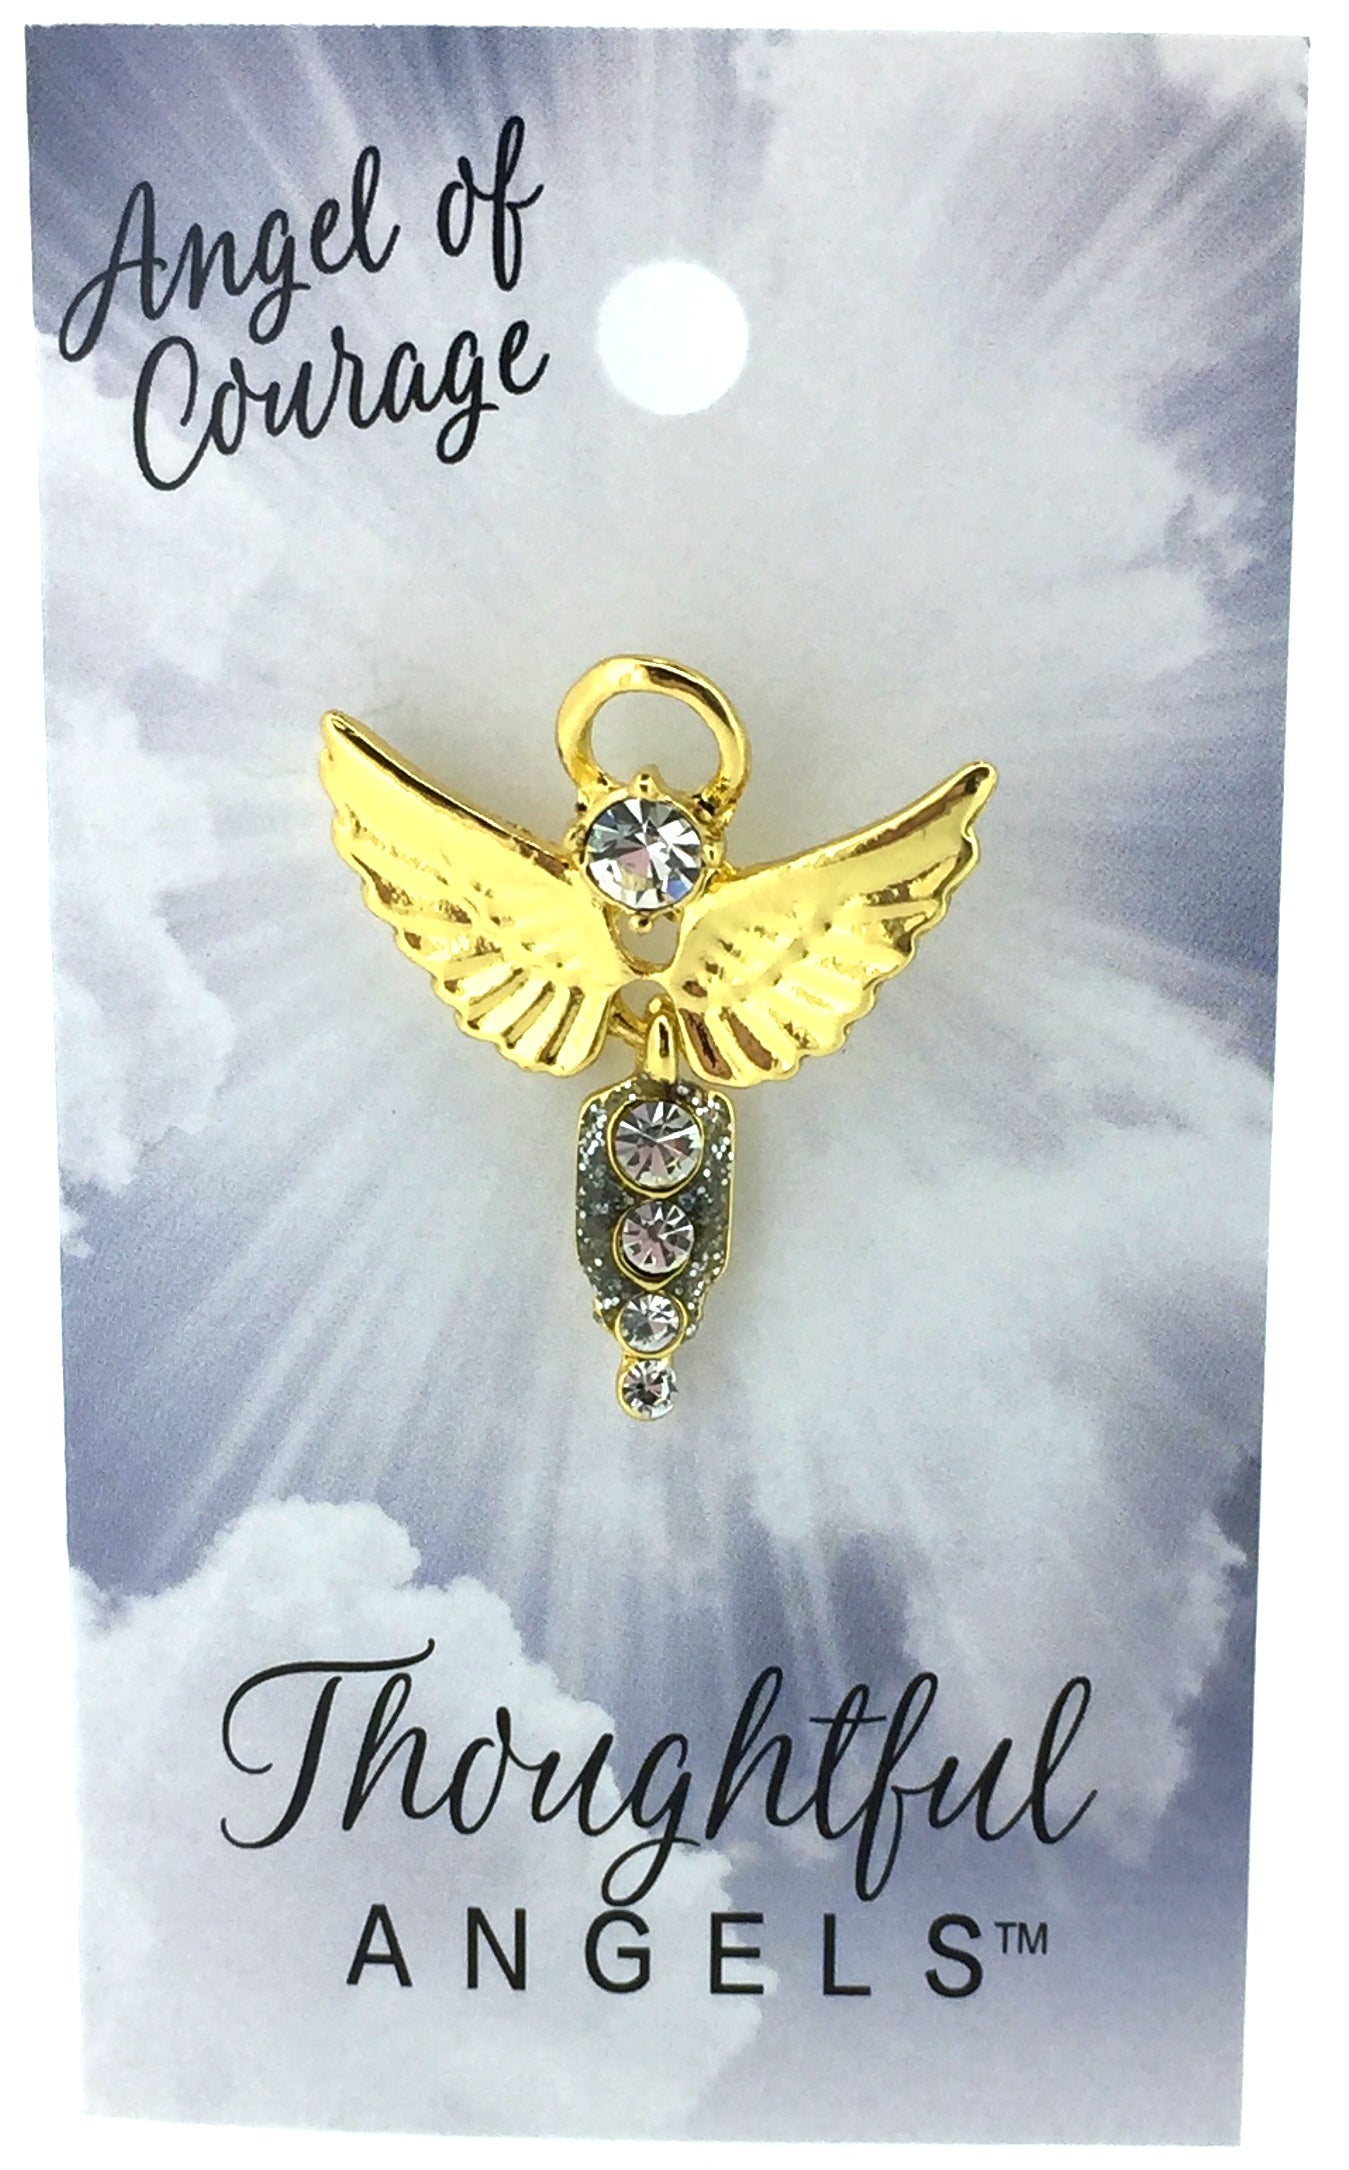 PIN ANGEL OF COURAGE